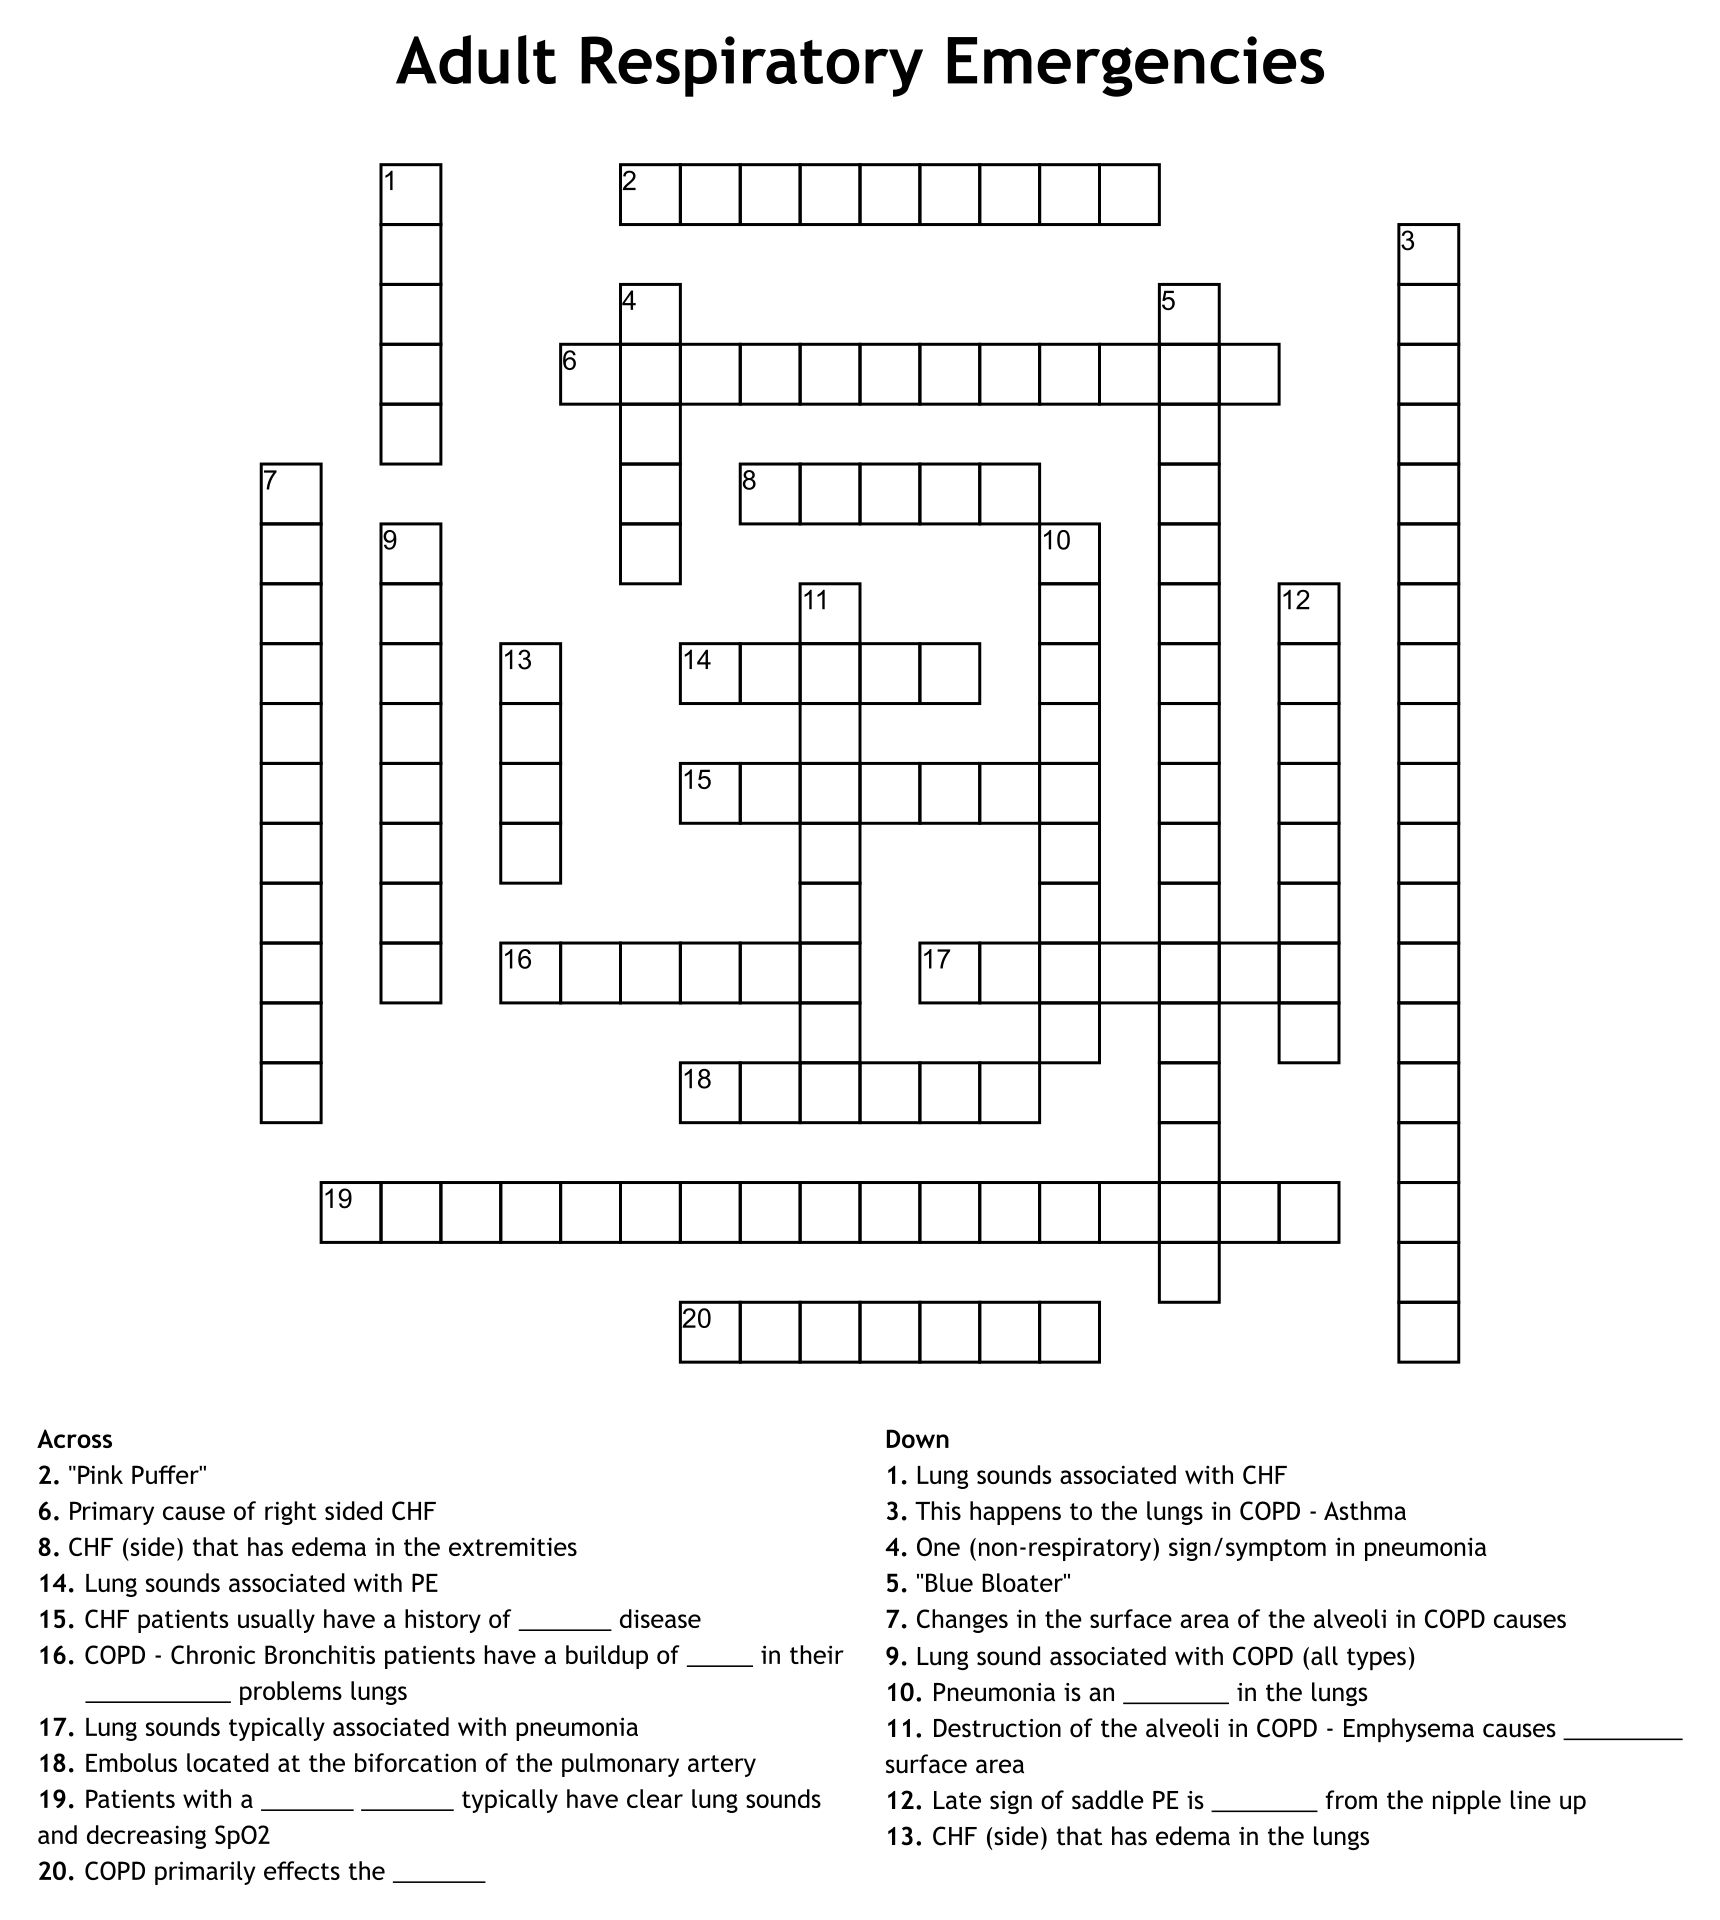 Free Printable Crossword Puzzles For Adults_52173